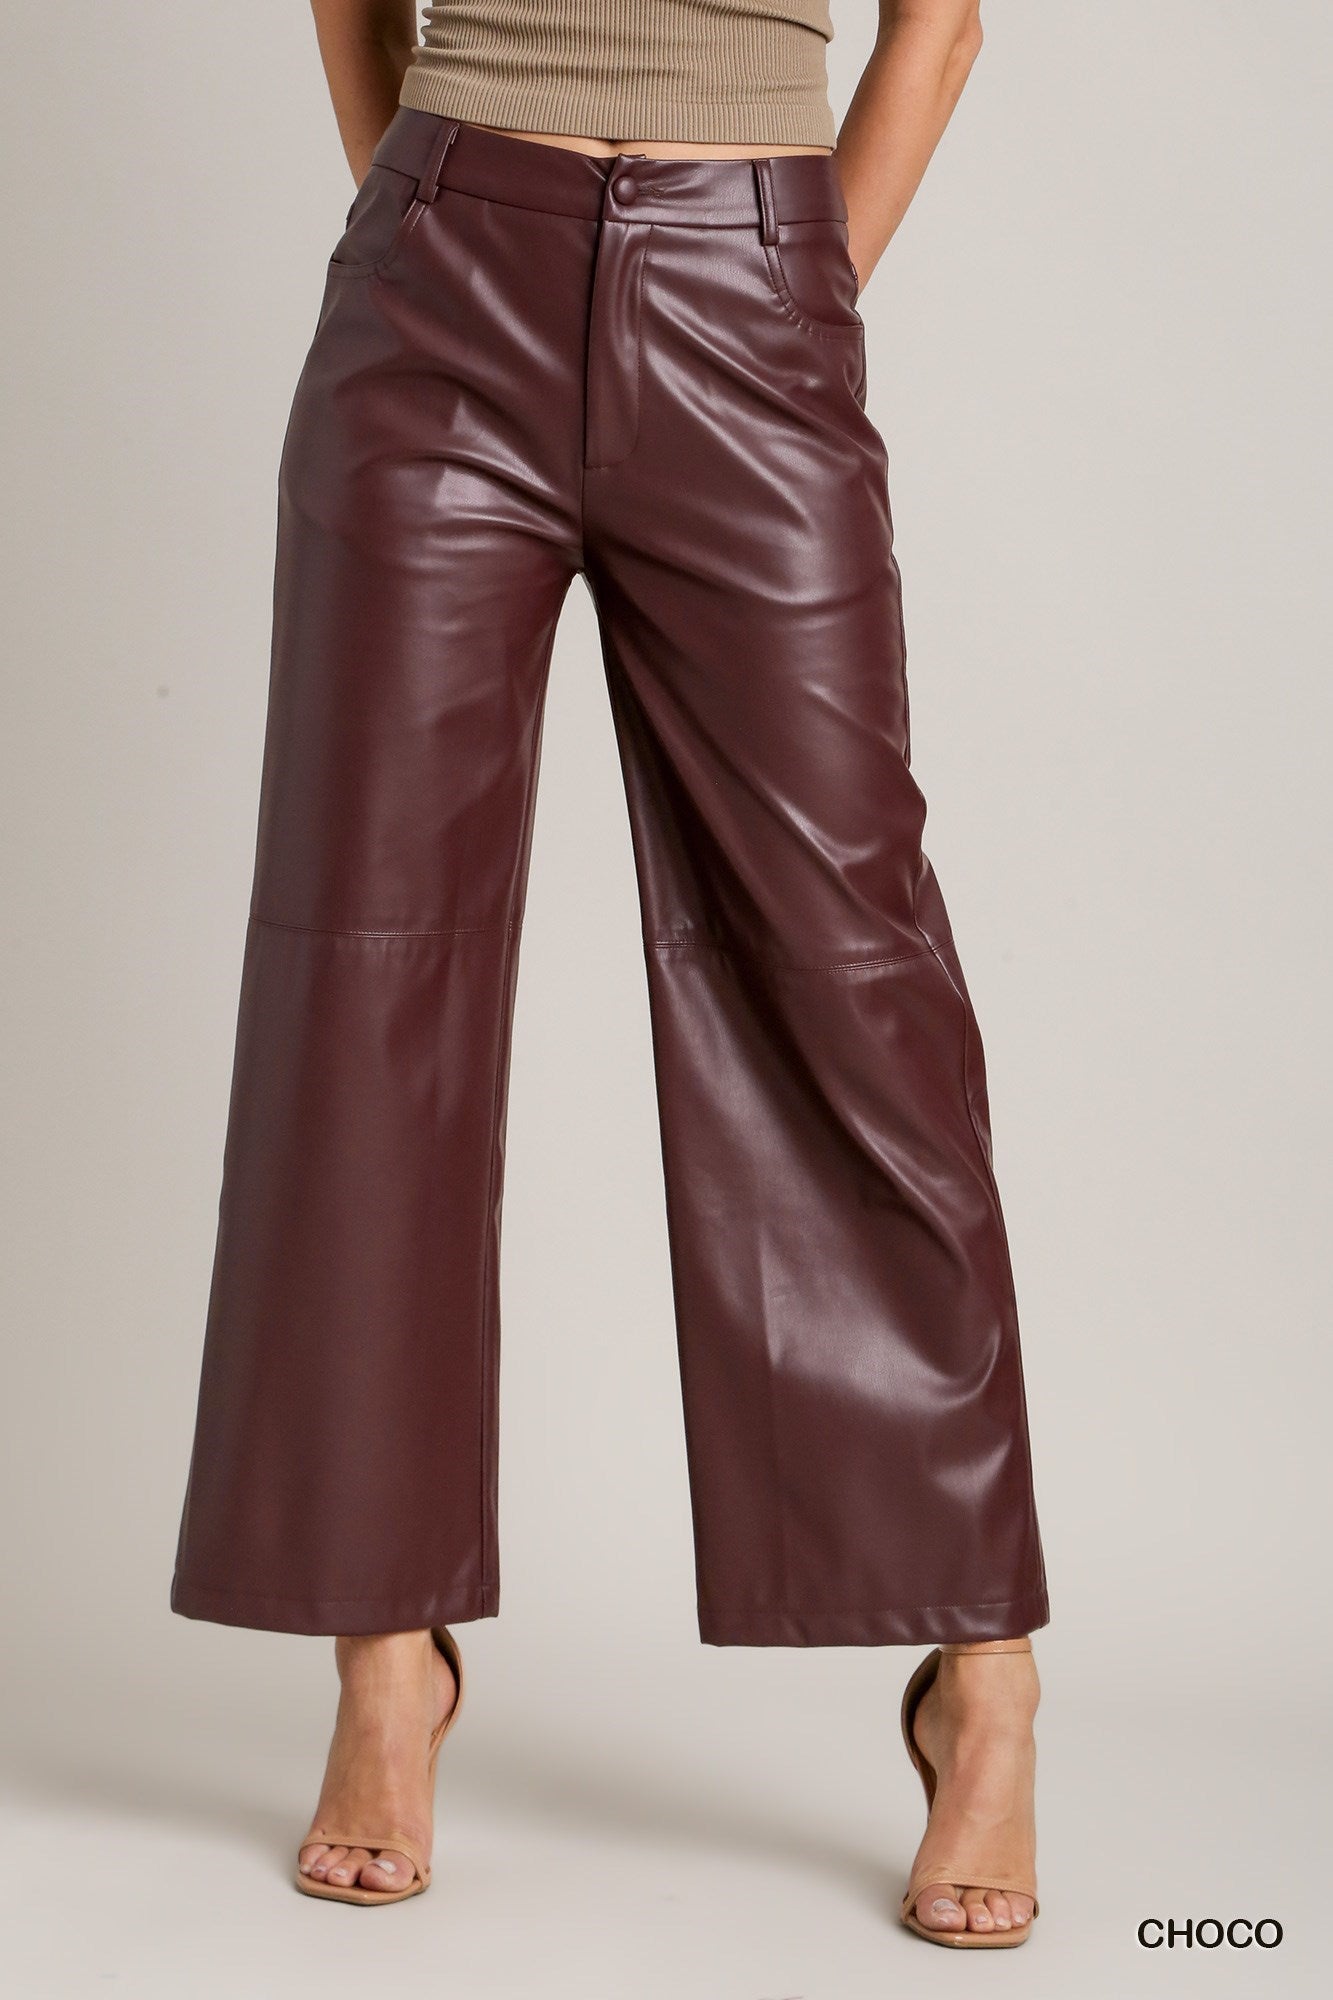 Chocolate Brown Faux Leather Pants